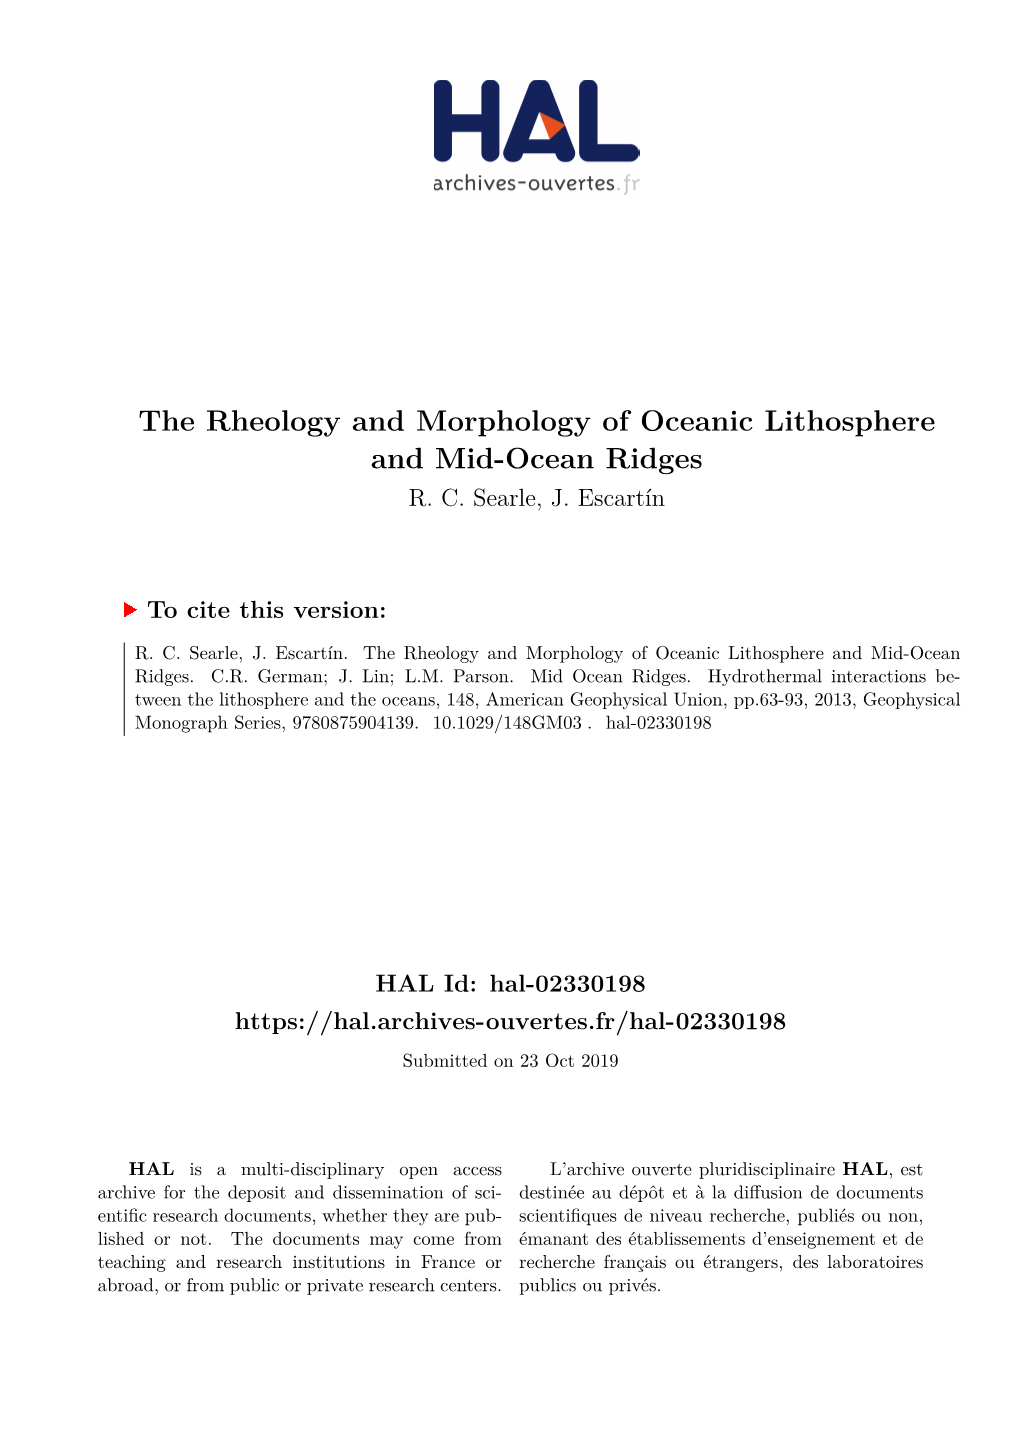 The Rheology and Morphology of Oceanic Lithosphere and Mid-Ocean Ridges R